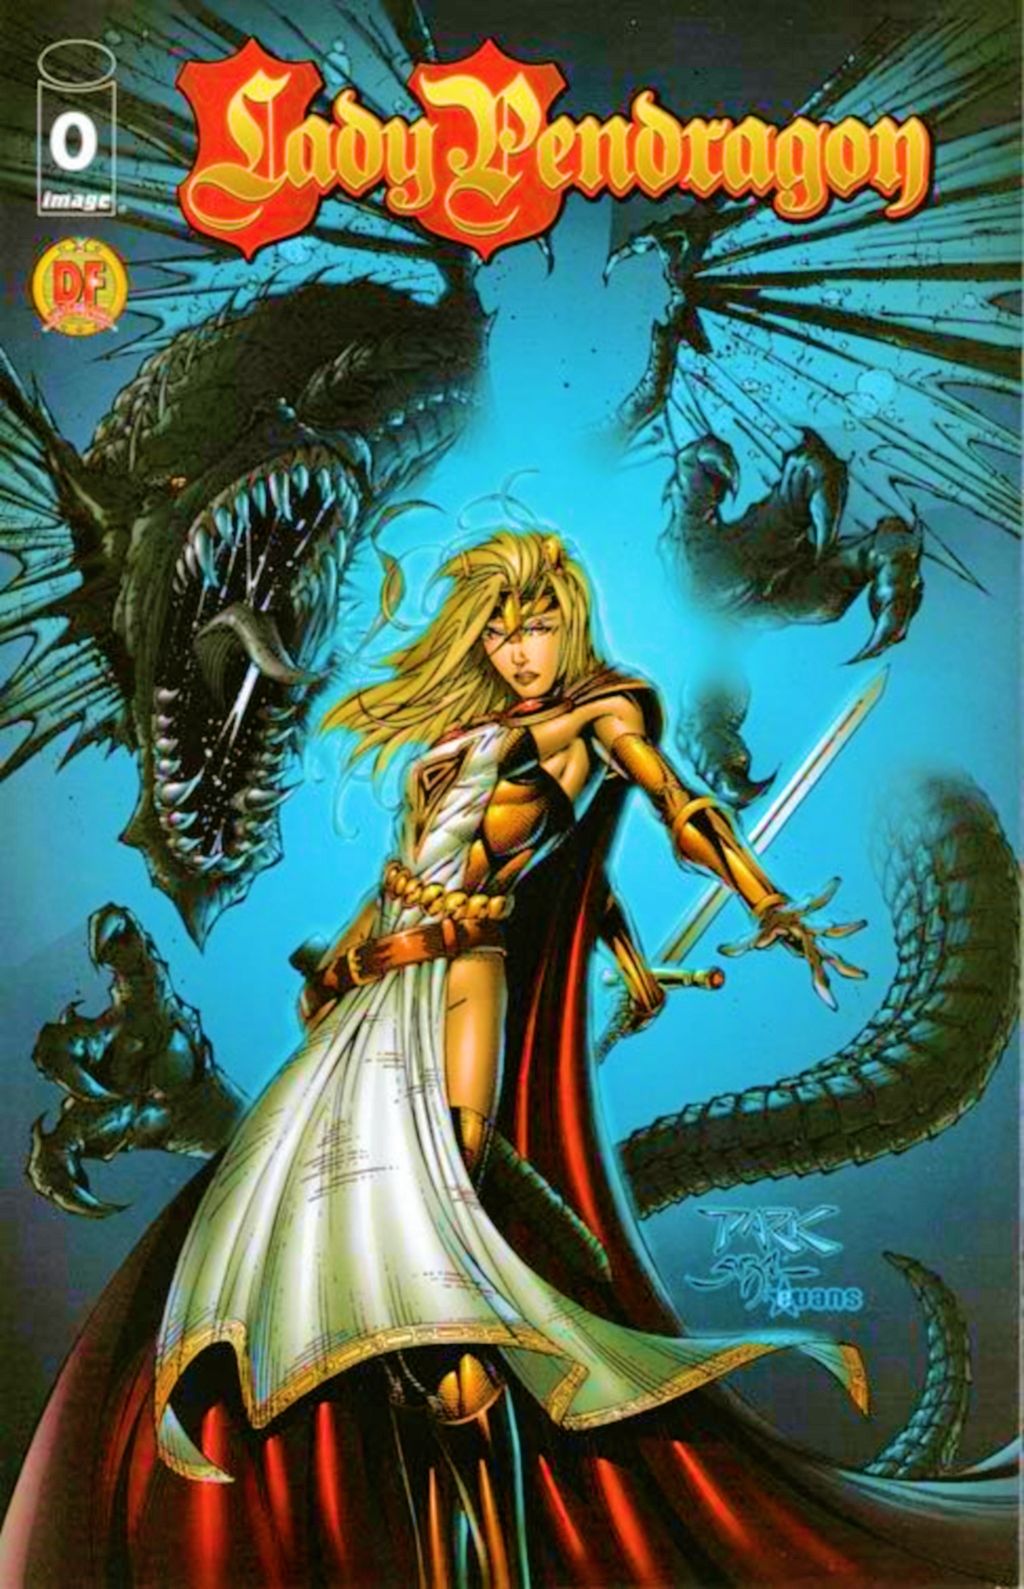 Read online Lady Pendragon comic -  Issue #0 - 3